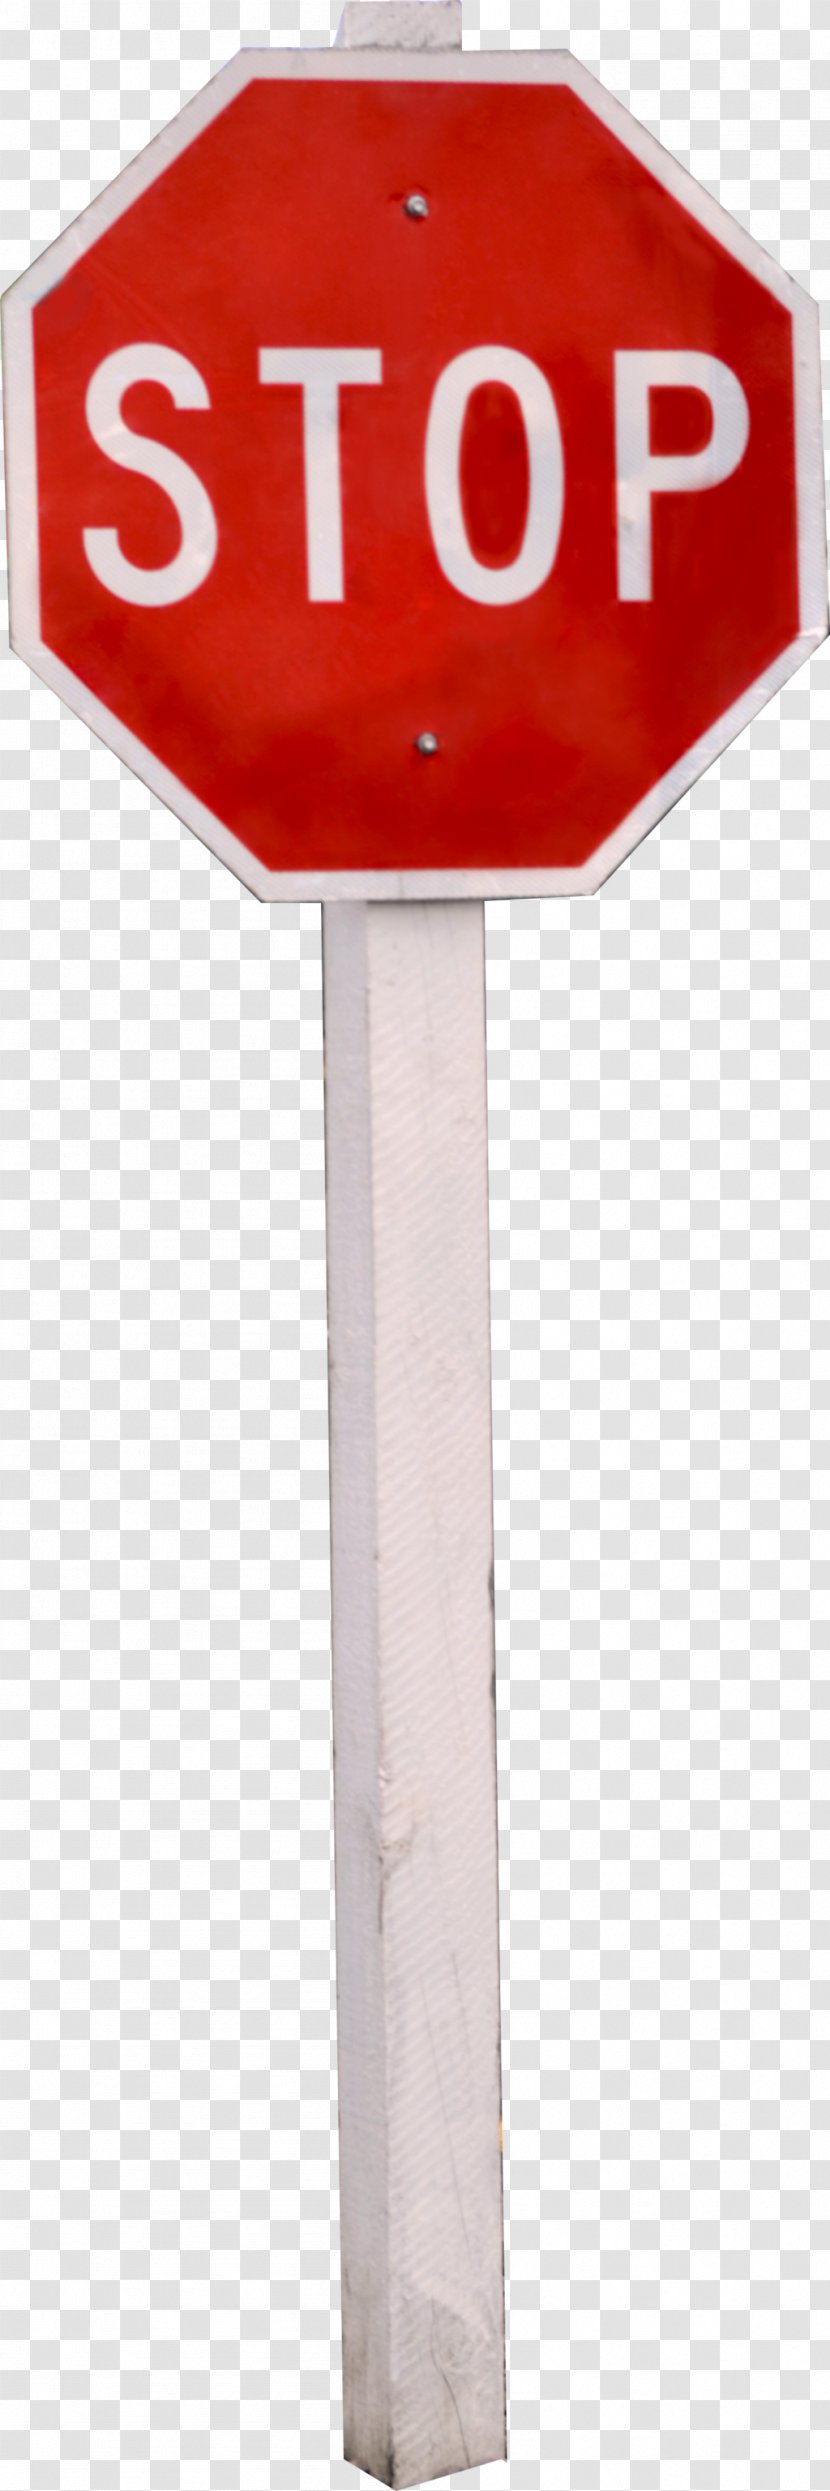 Stop Sign Traffic Manual On Uniform Control Devices Yield Transparent PNG